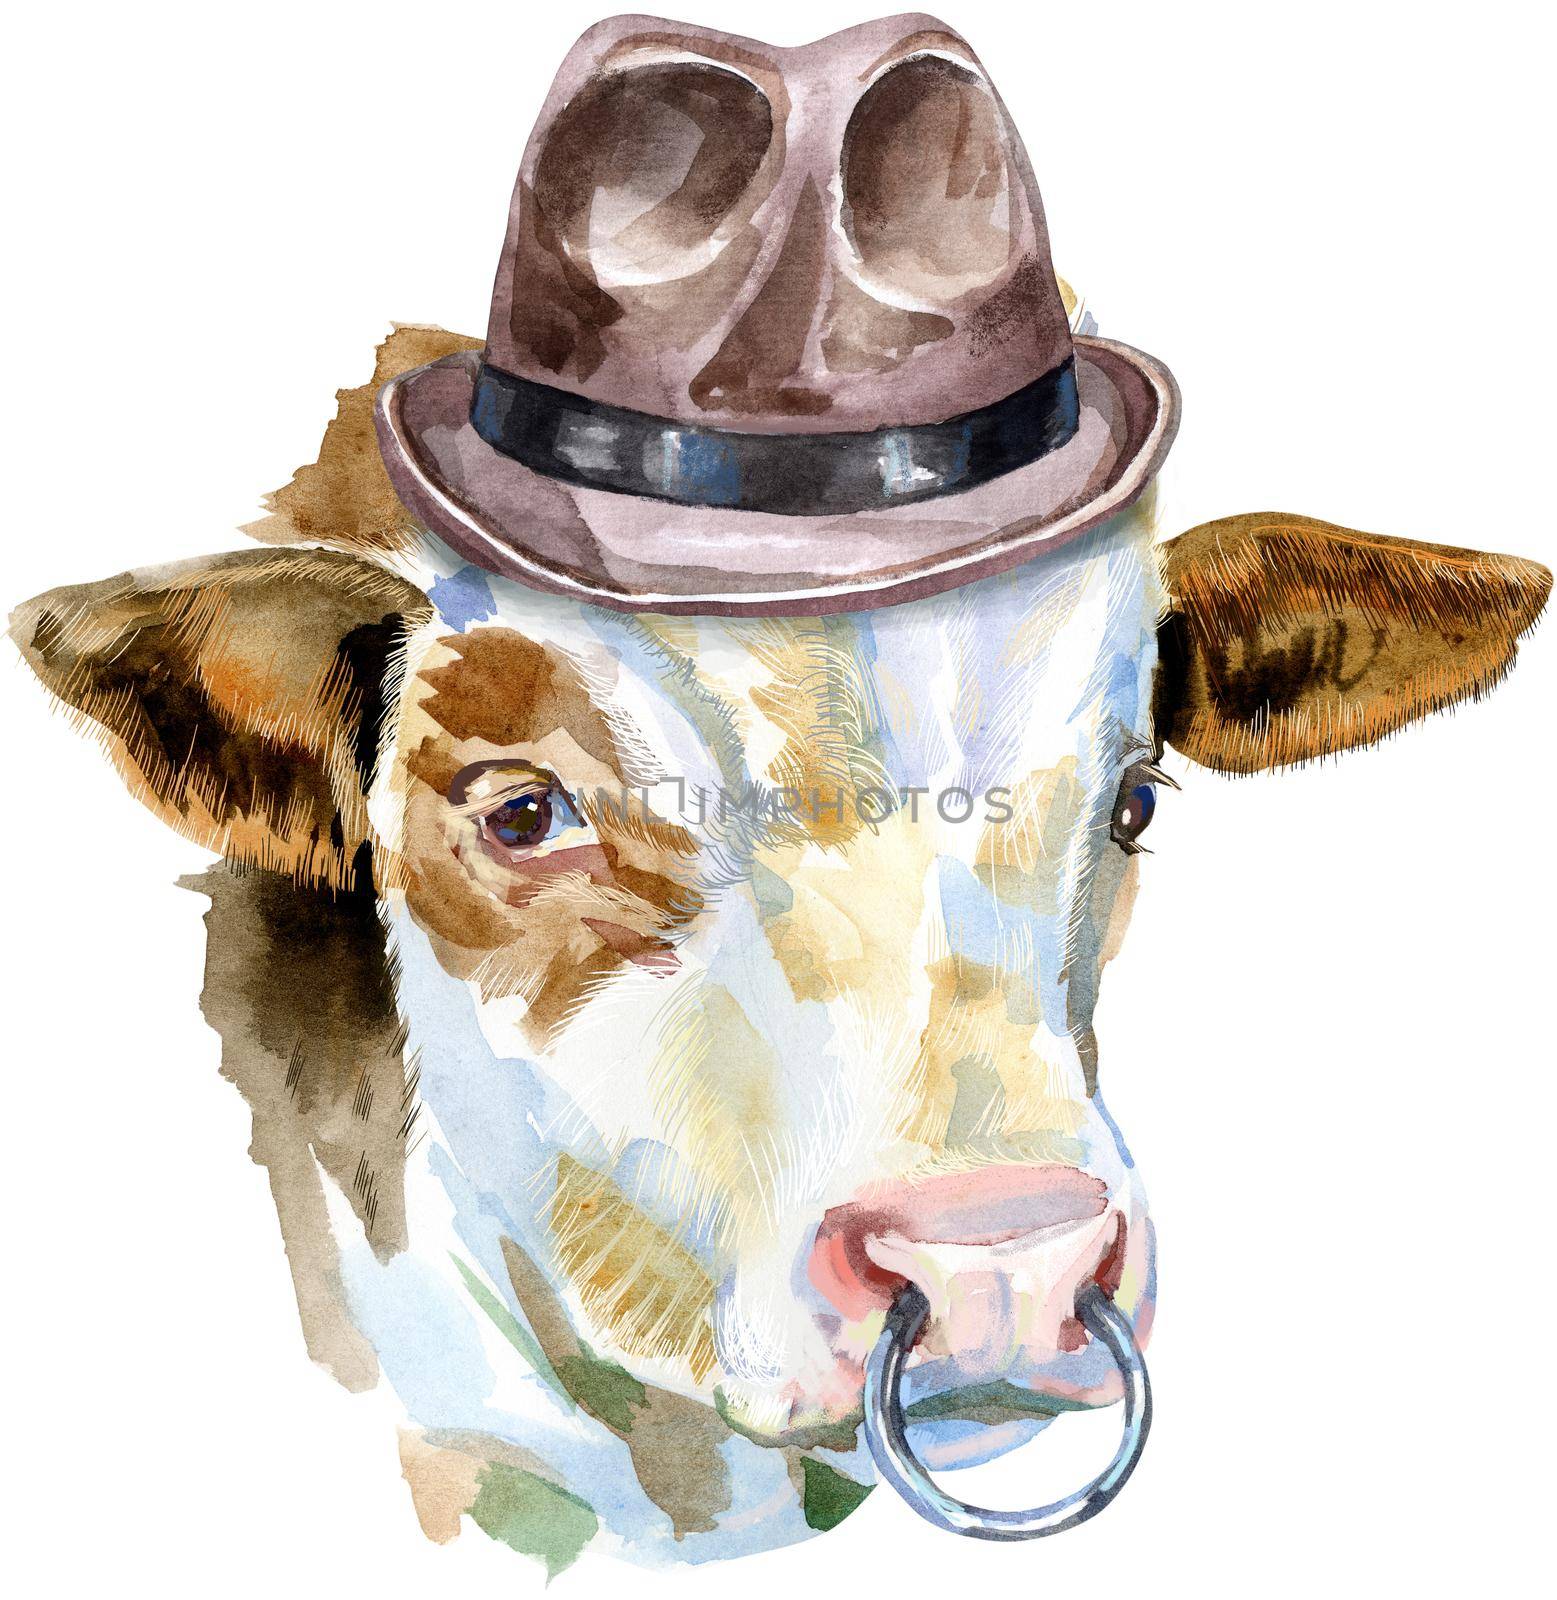 Bull watercolor graphics. Bull with brown hat. Animal illustration watercolor textured background.